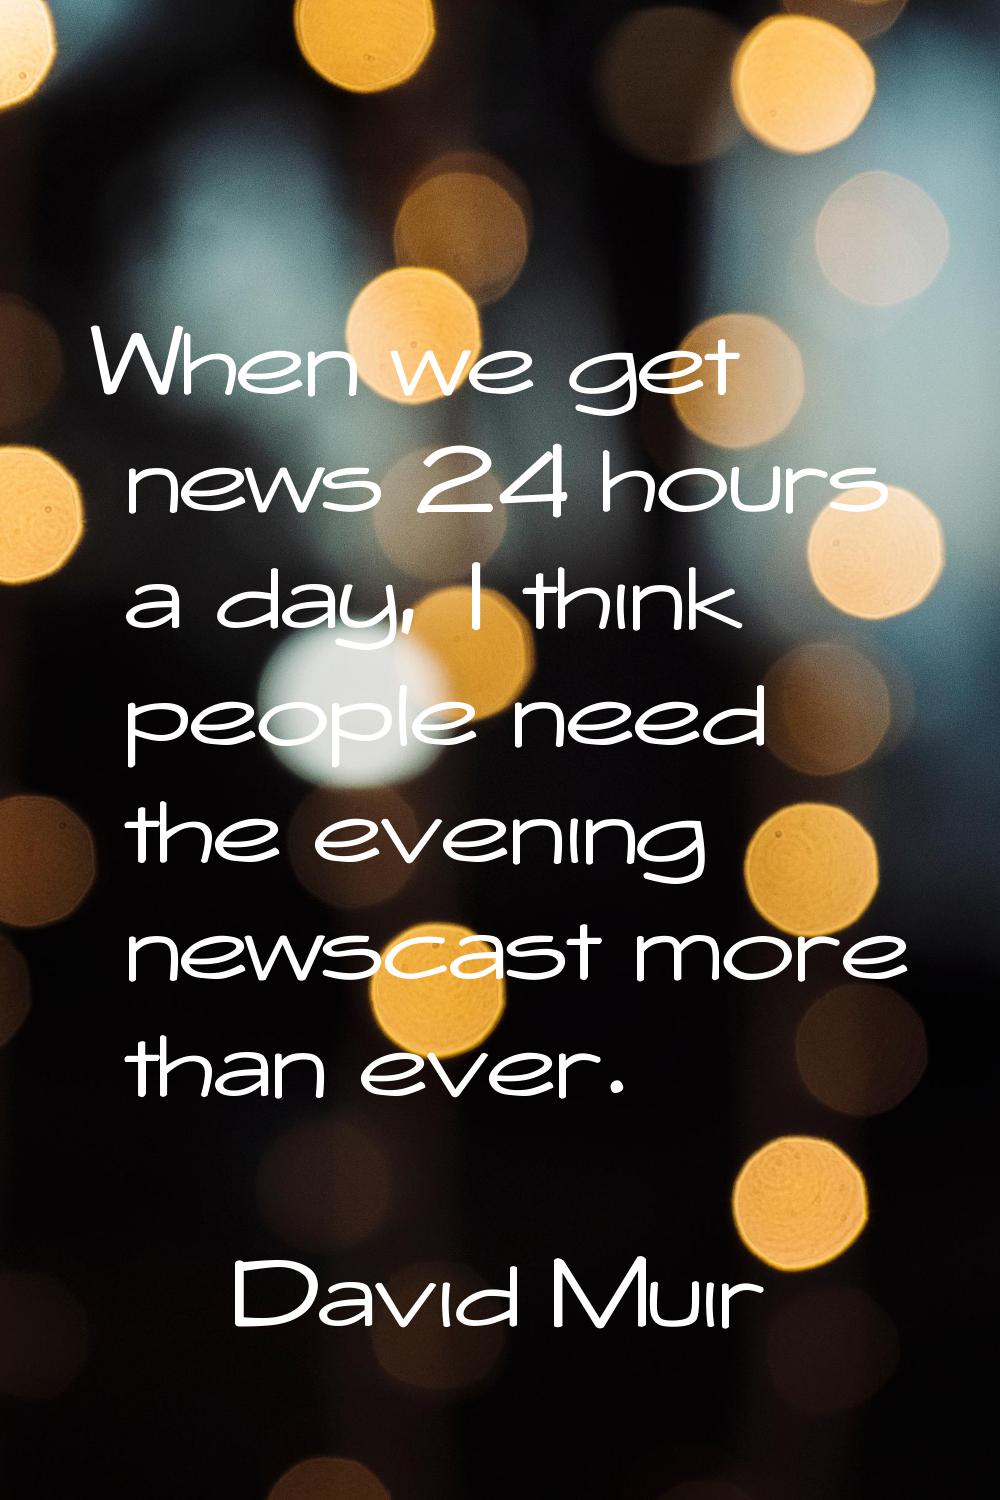 When we get news 24 hours a day, I think people need the evening newscast more than ever.